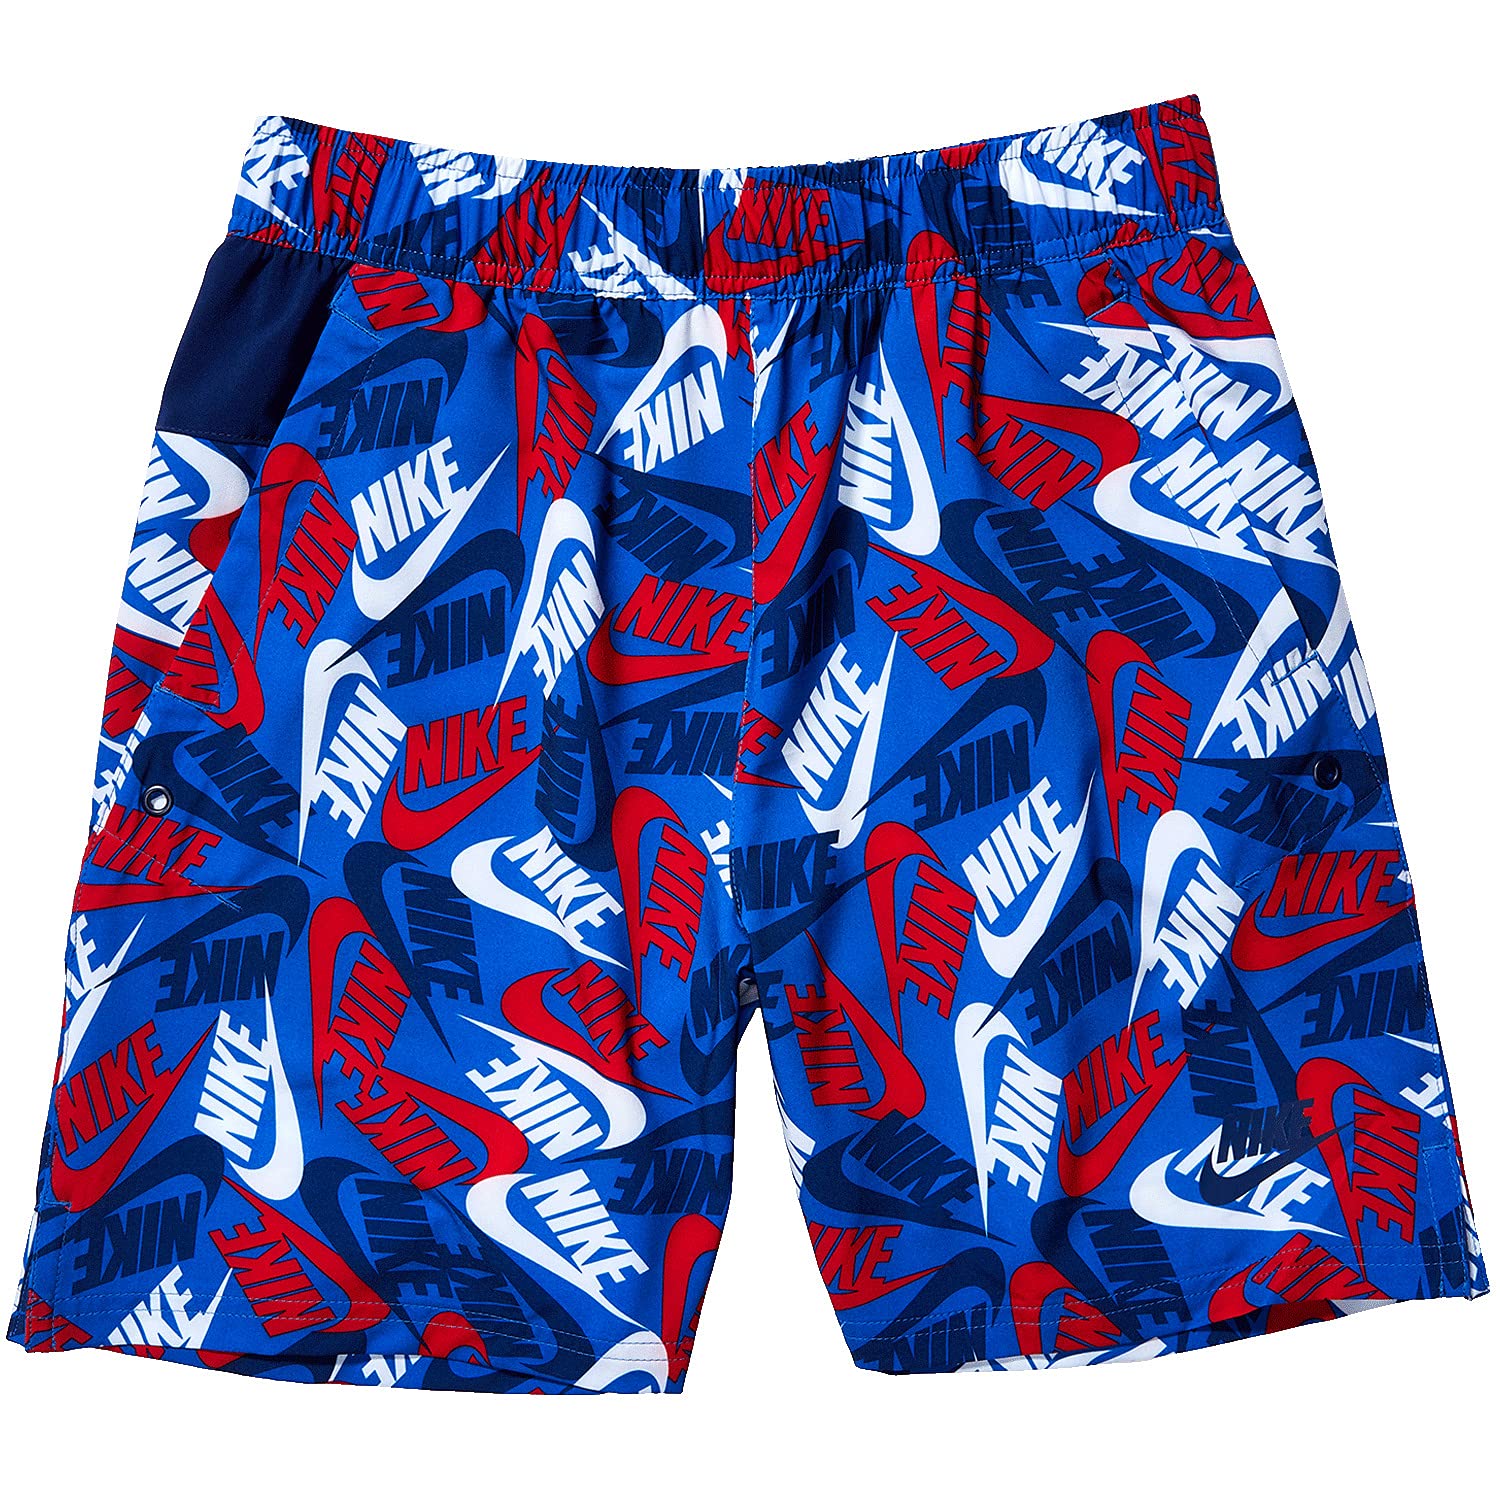 Image 1 of Sportswear Woven Print Shorts - Extended Size (Big Kids)